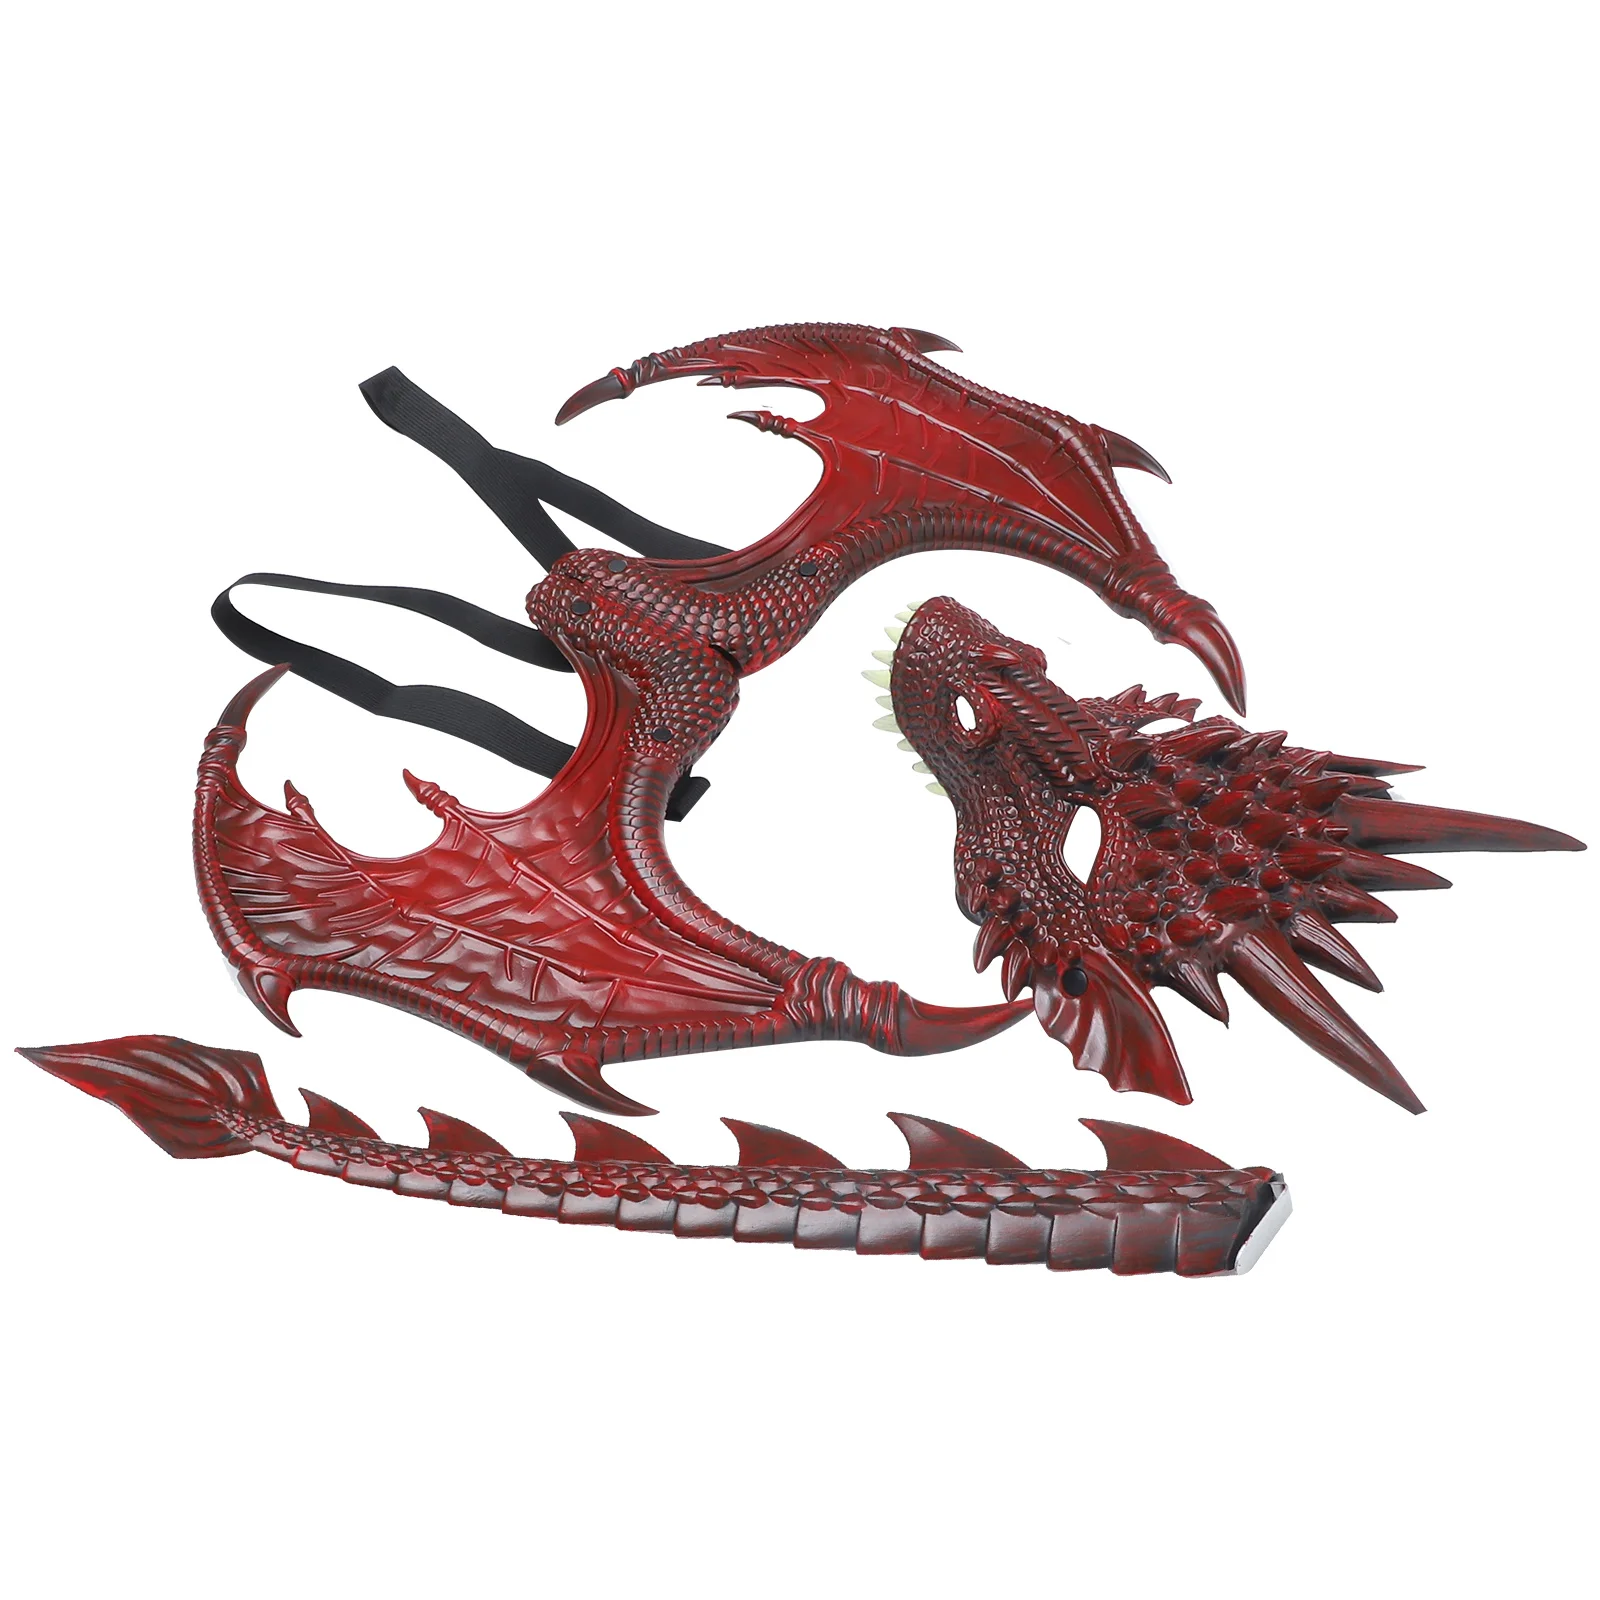 

Dragon Mask Wings Kids Halloween Costume Party Favor Cosplay Accessory Supplies Rubber Foam Children's Prop